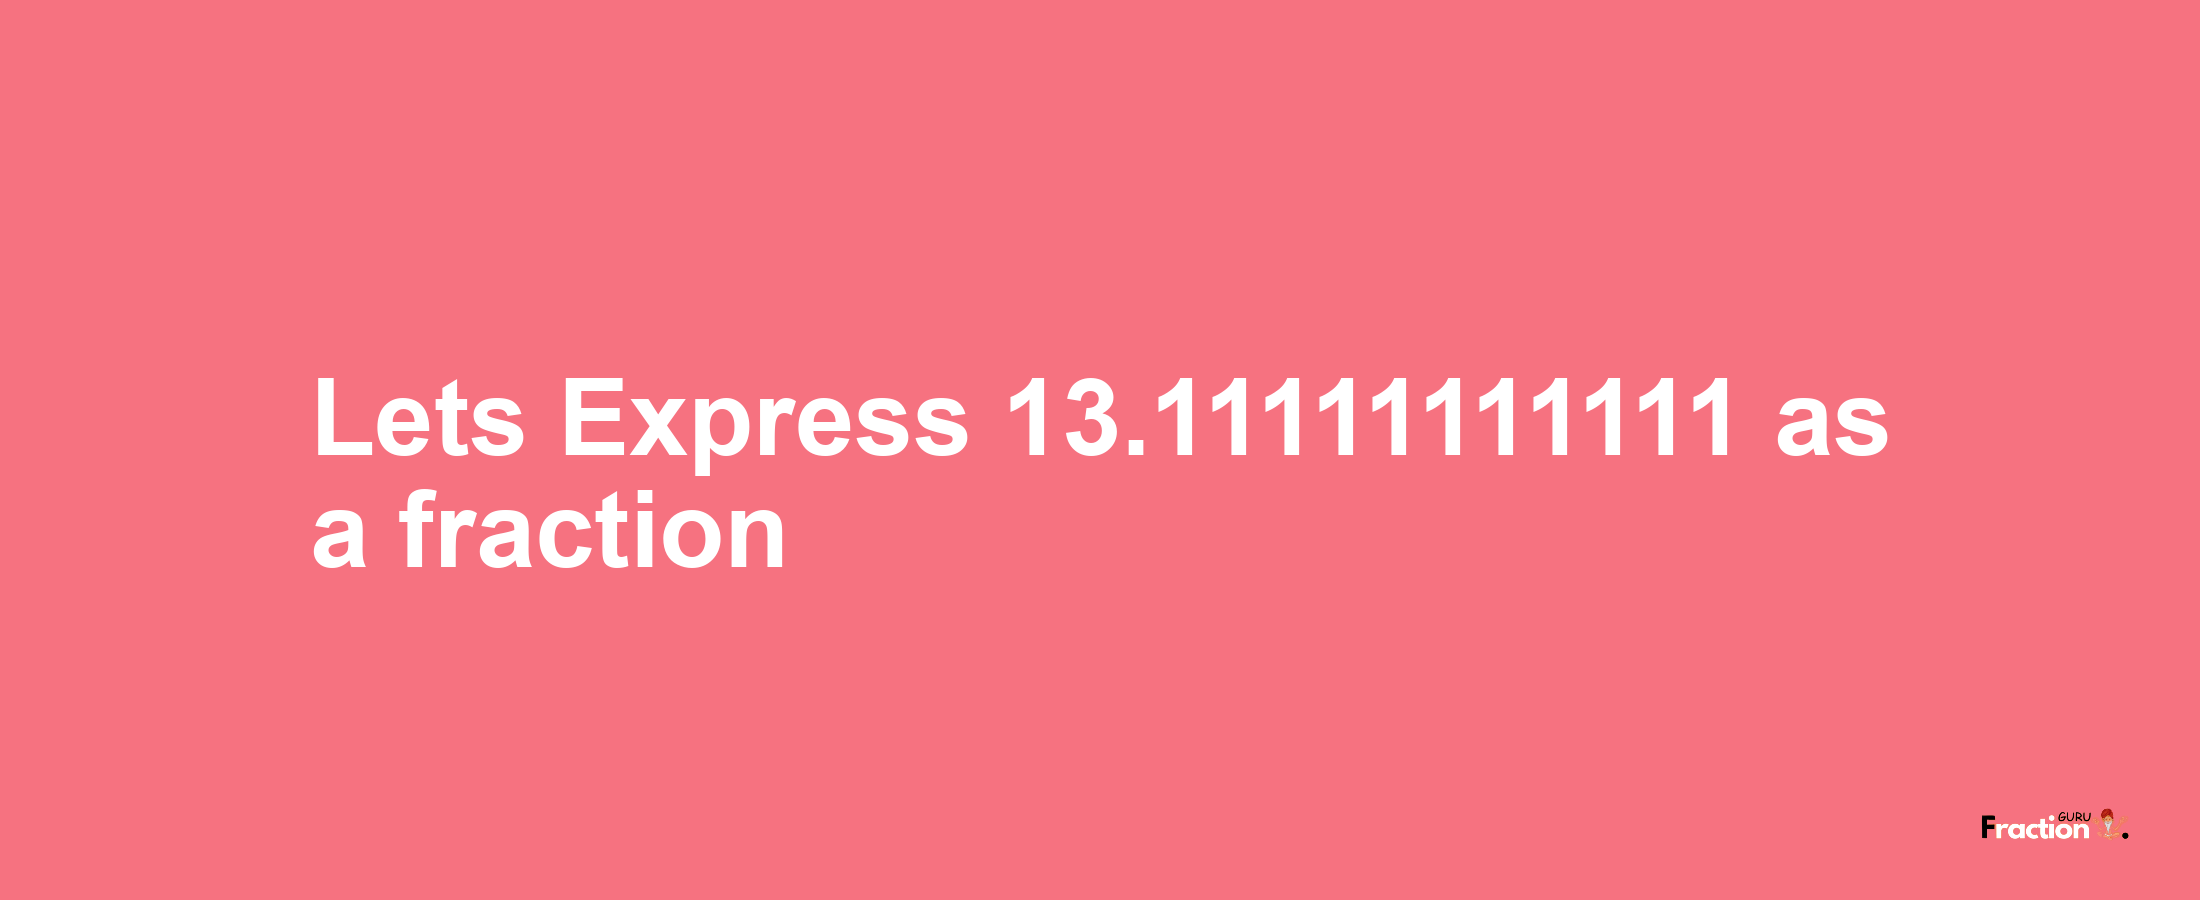 Lets Express 13.11111111111 as afraction